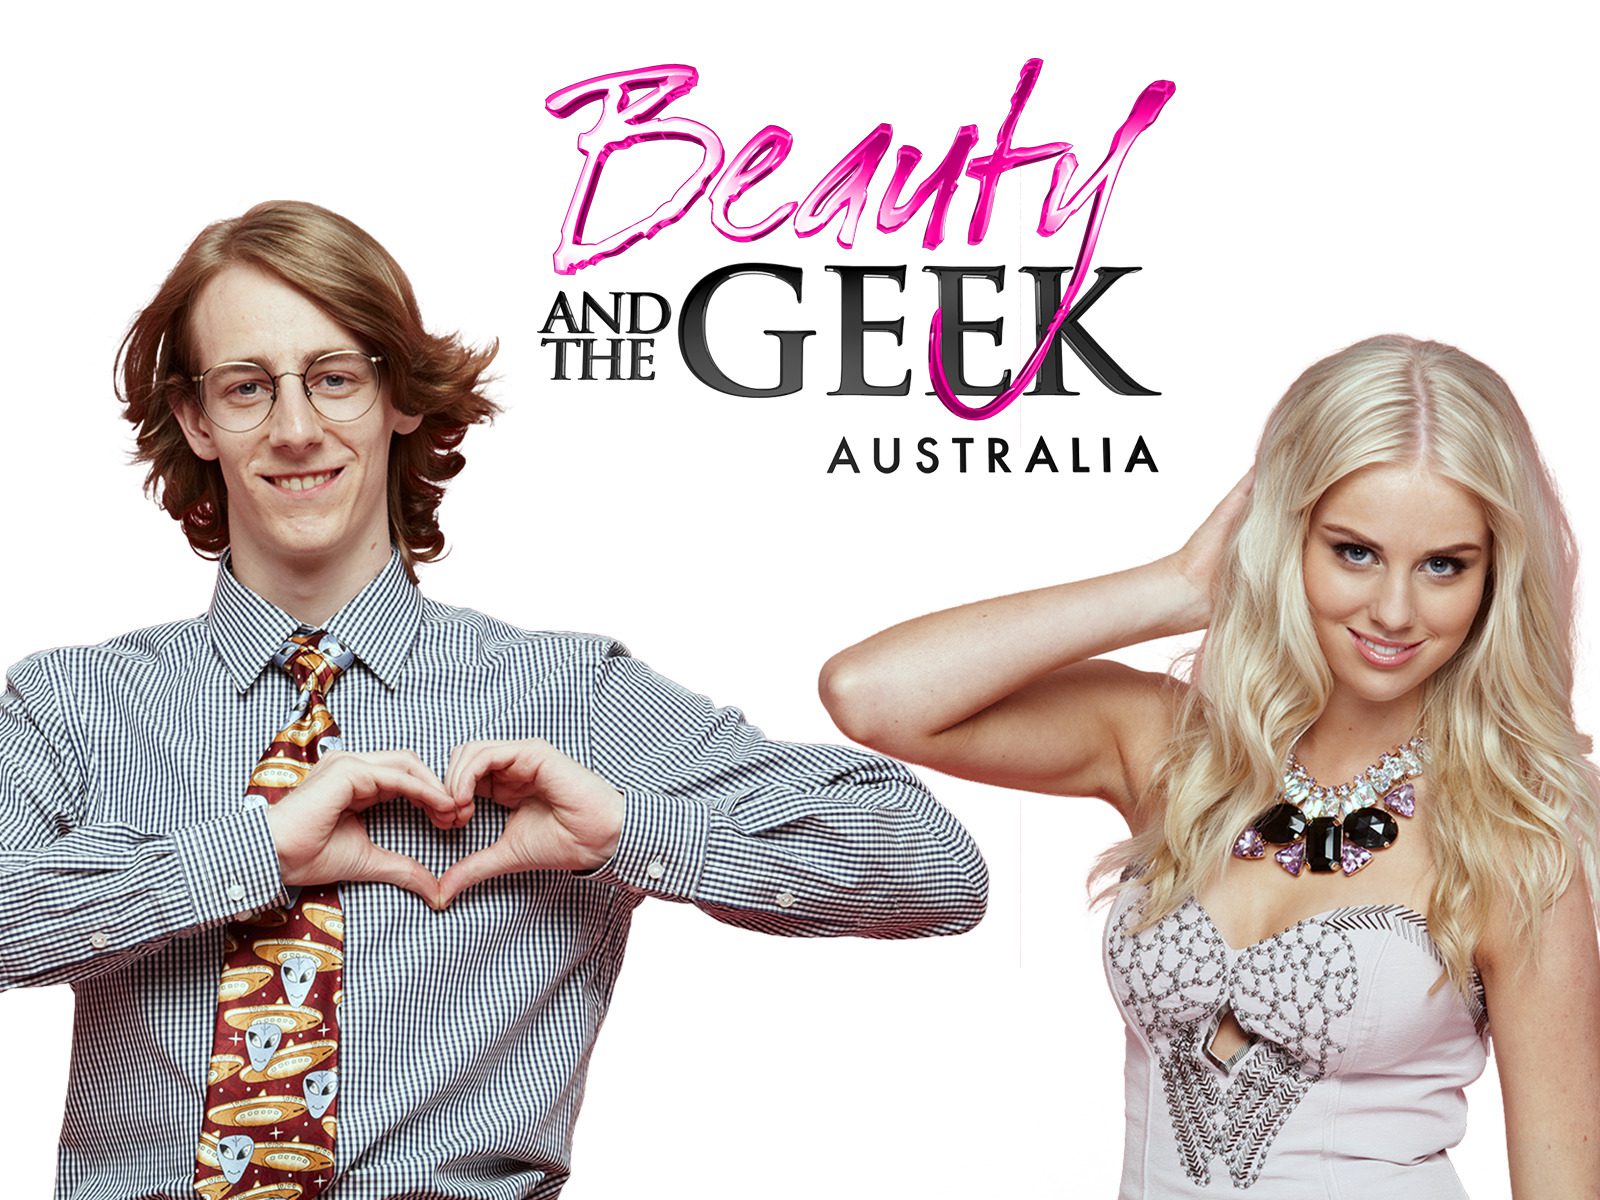 Beauty and the geek